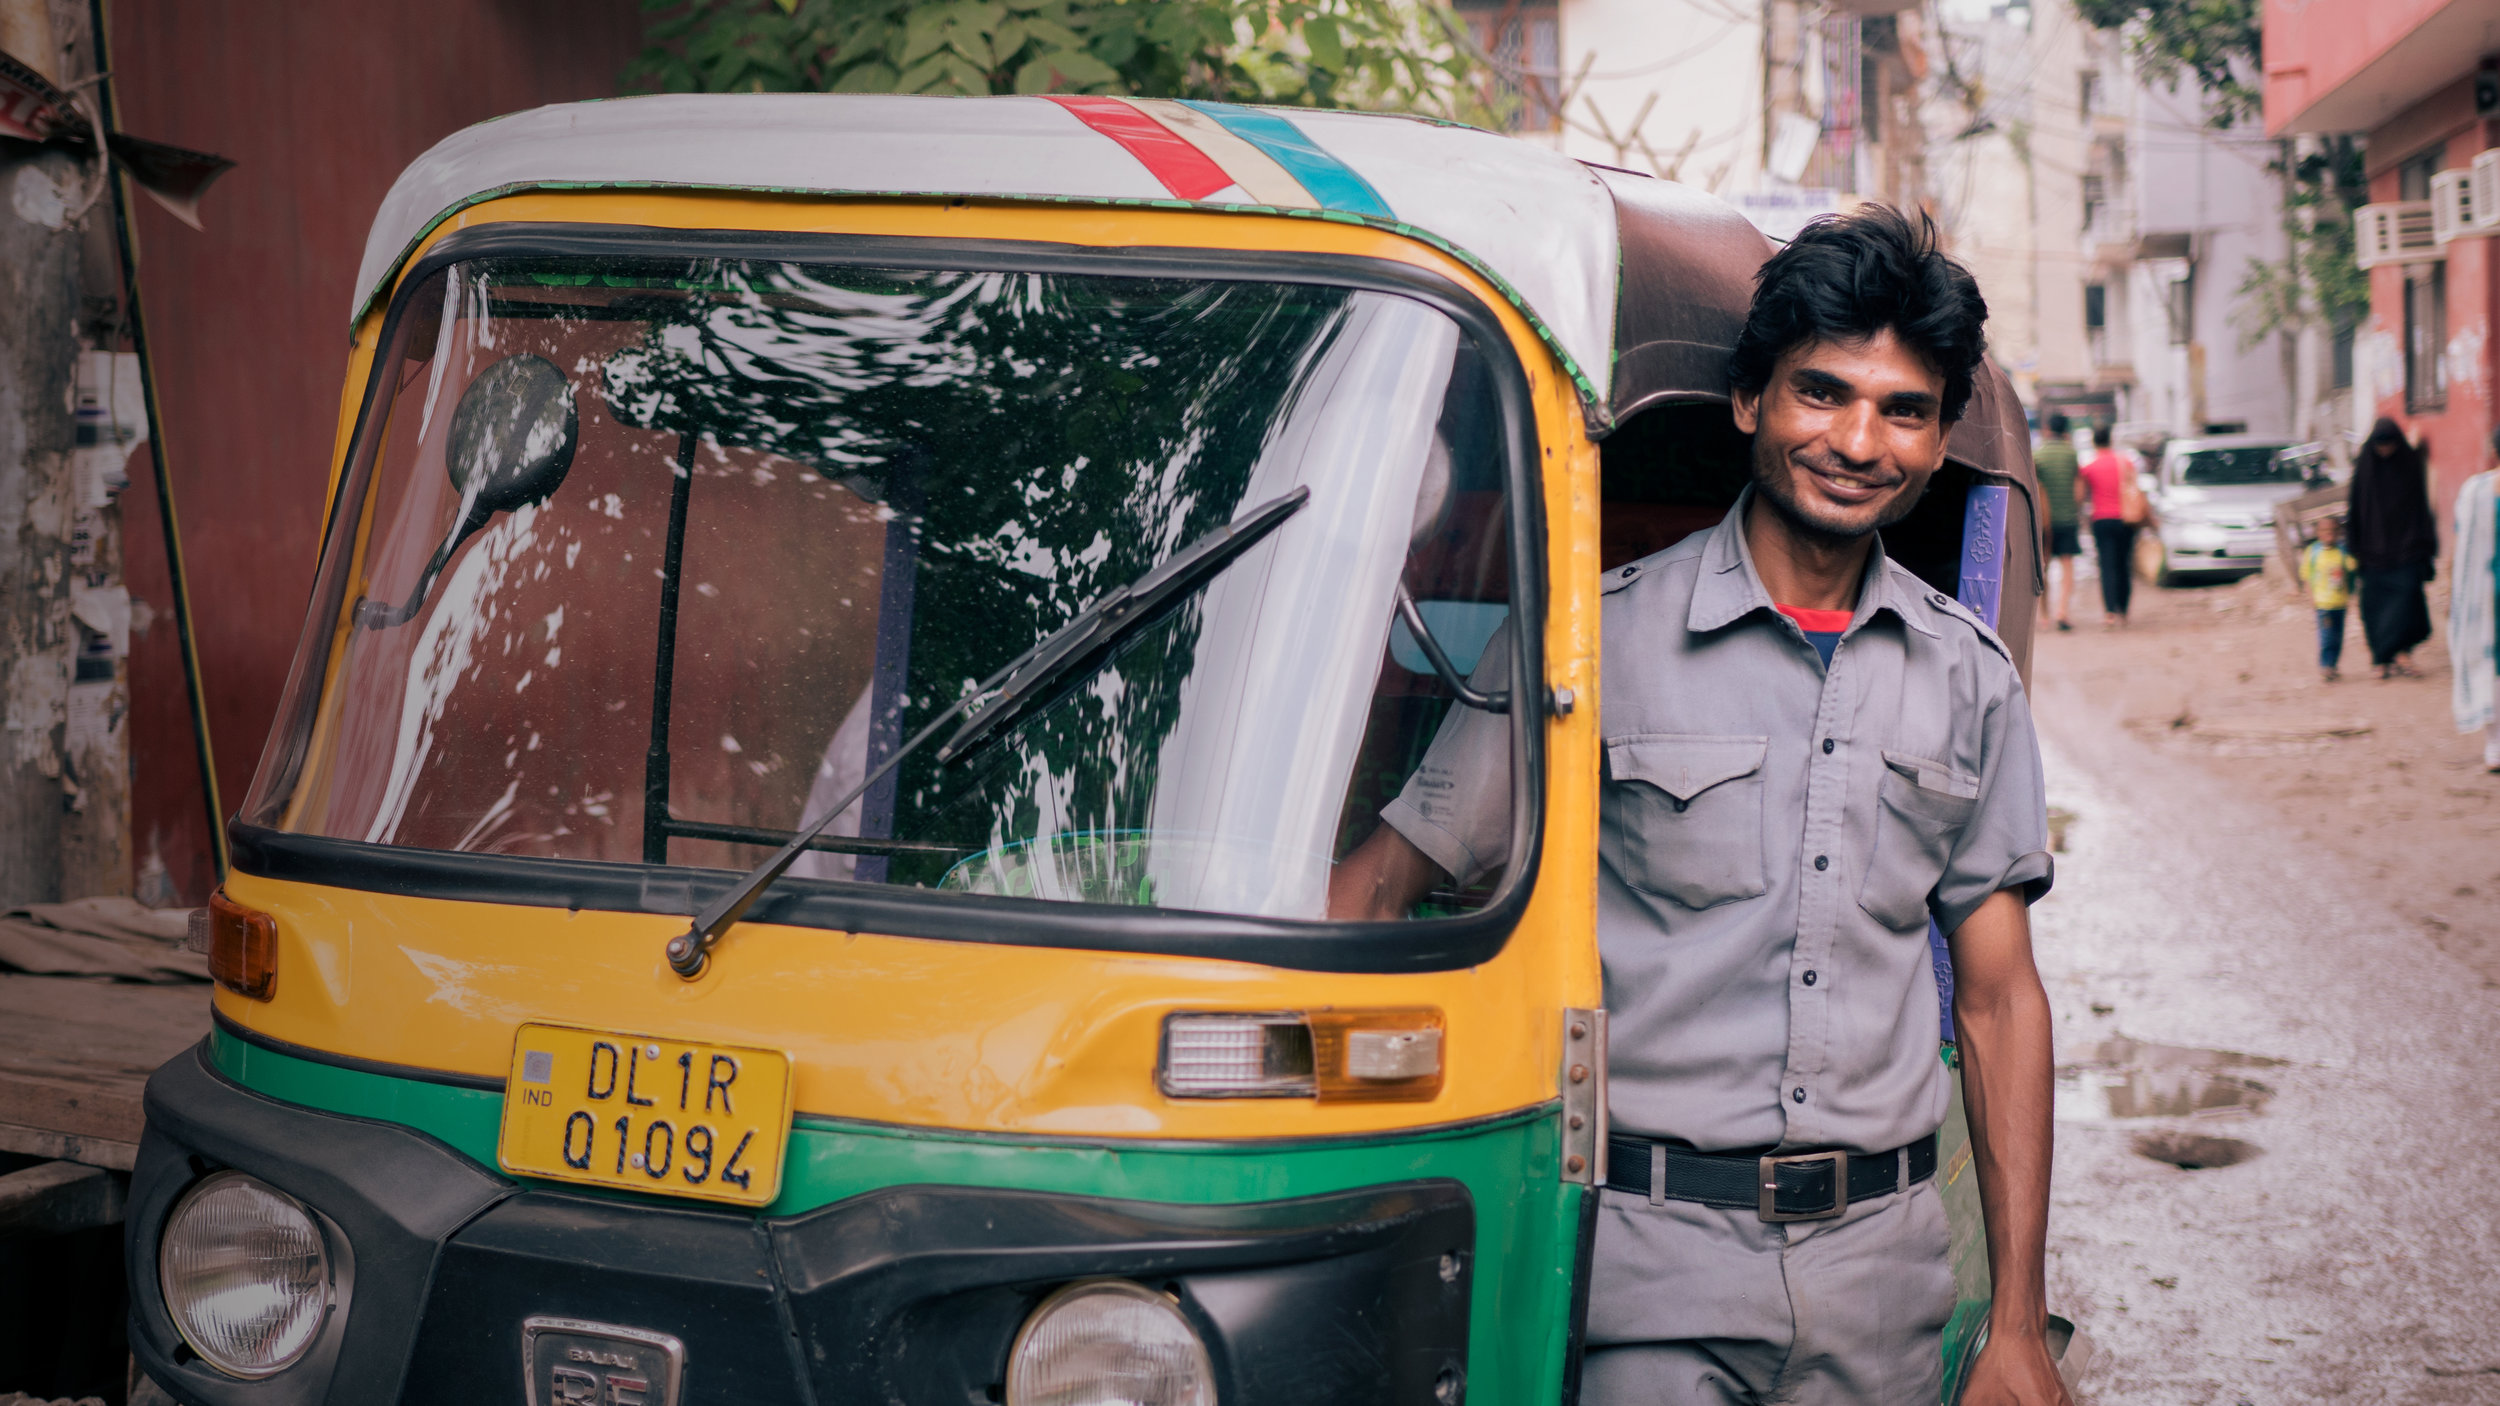  Mohammed Tafiq, rickshaw wallah  Mohammed knows spending his whole day in the open rickshaw is damaging his health but there’s little he can do about it.   “Sometimes I get a really bad cough and occasionally a fever, the cough and fever come when t